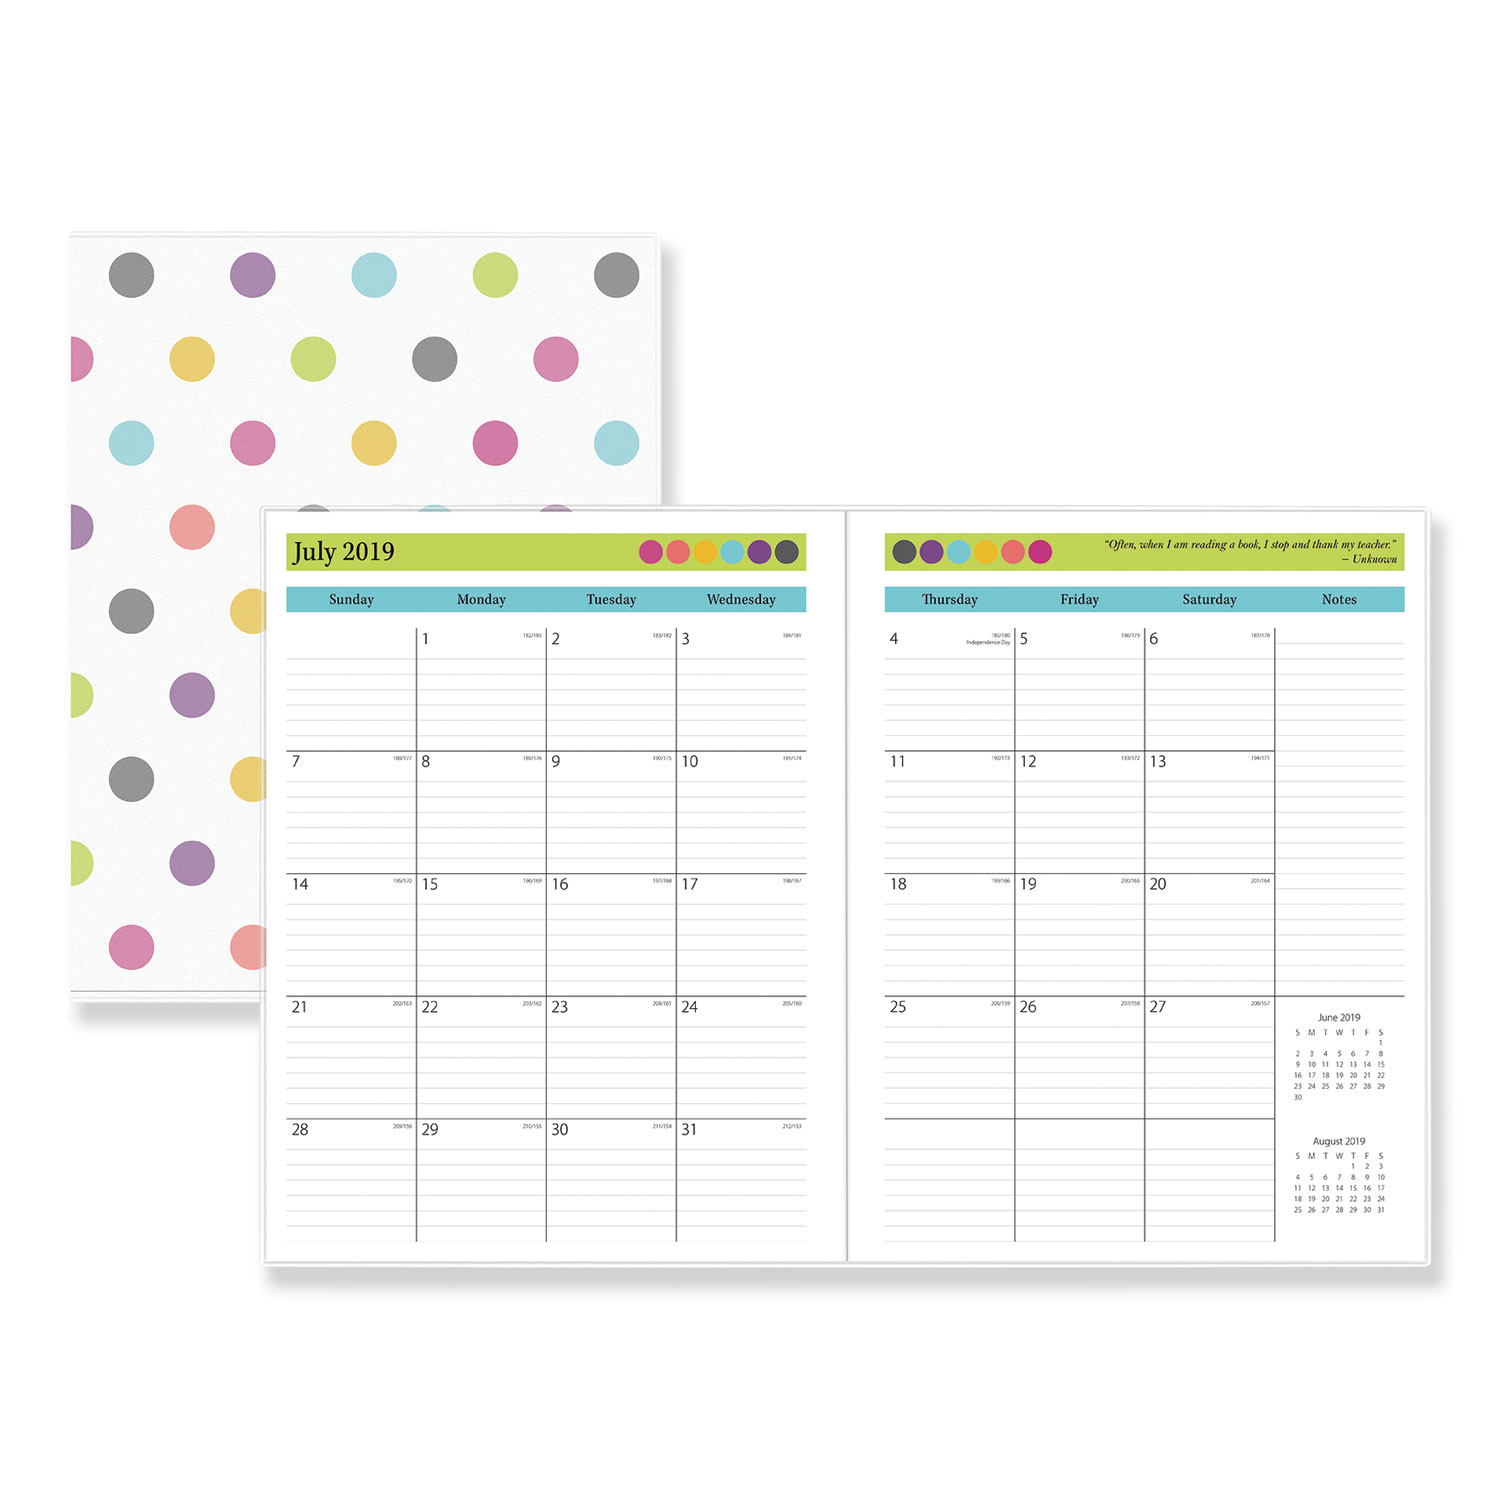  Blue Sky 100336 Teacher Dots Academic Year Monthly Planner, 11 x 8.5, Assorted, 2020-2021 (BLS100336) 